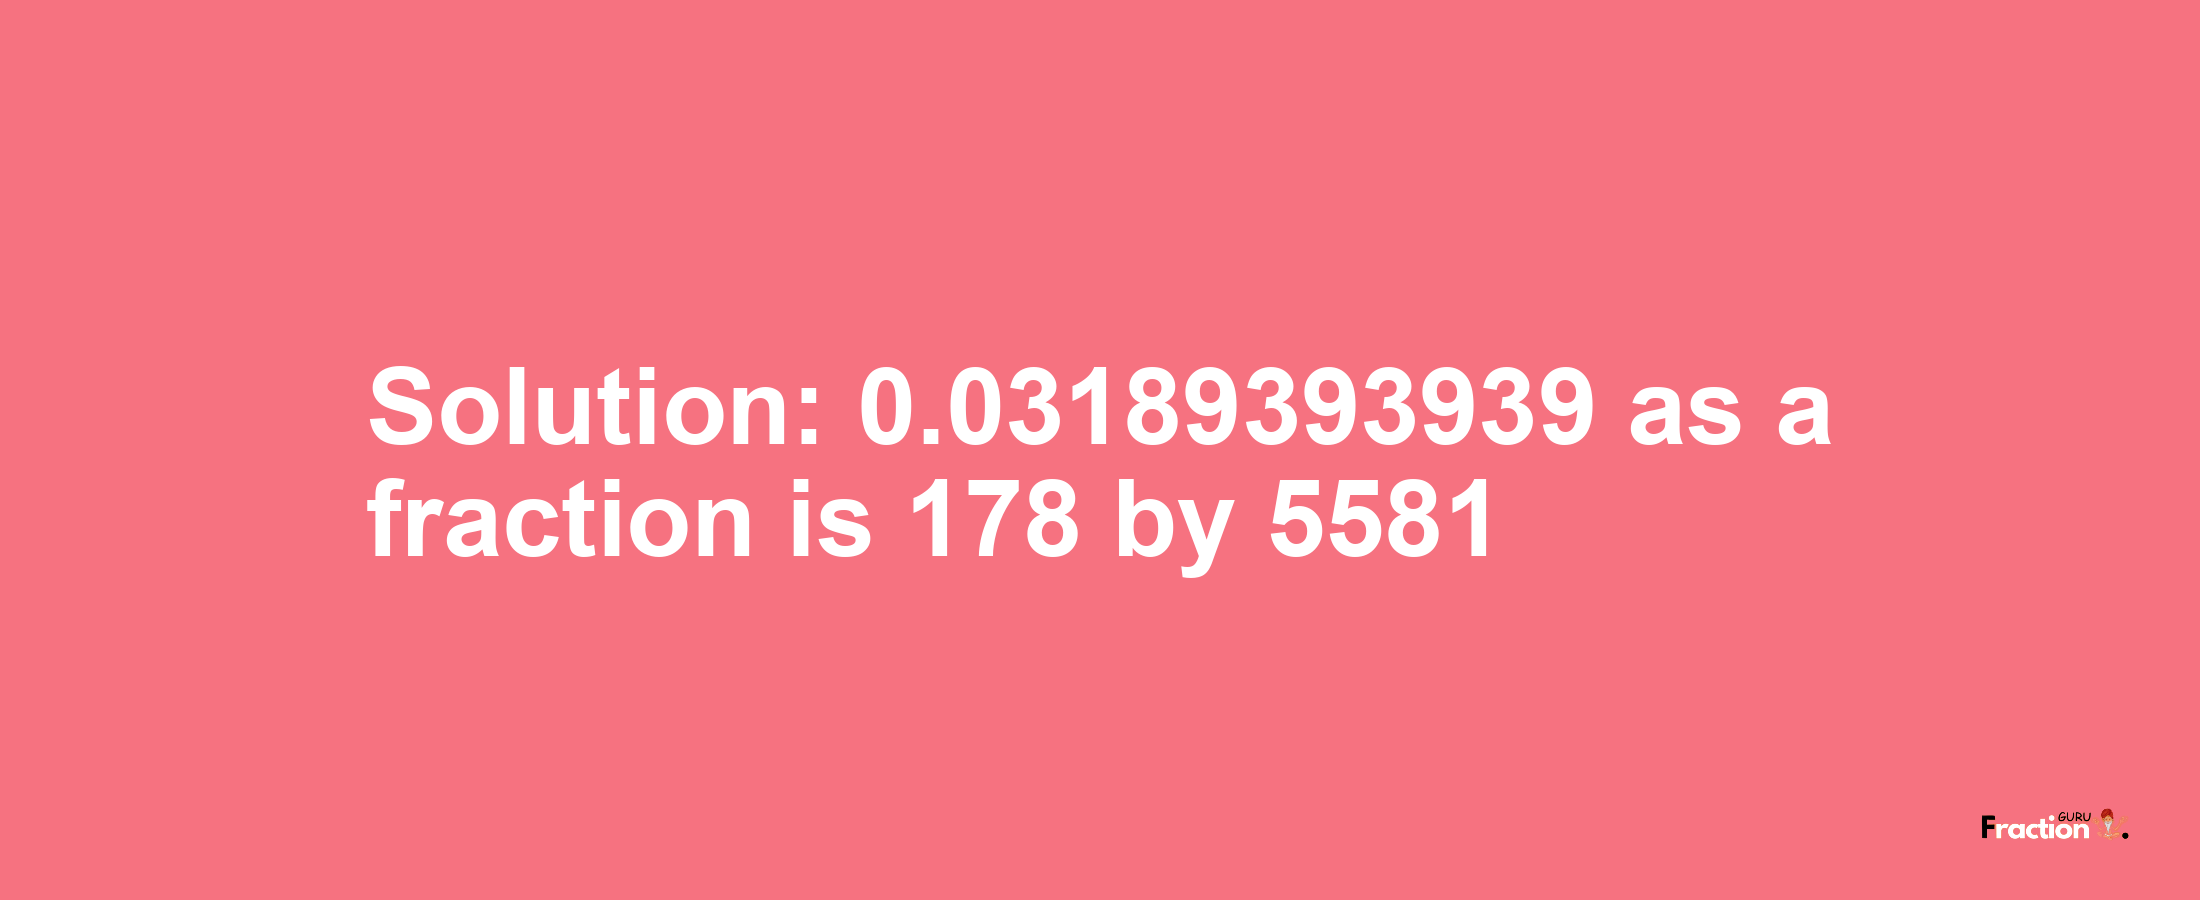 Solution:0.03189393939 as a fraction is 178/5581